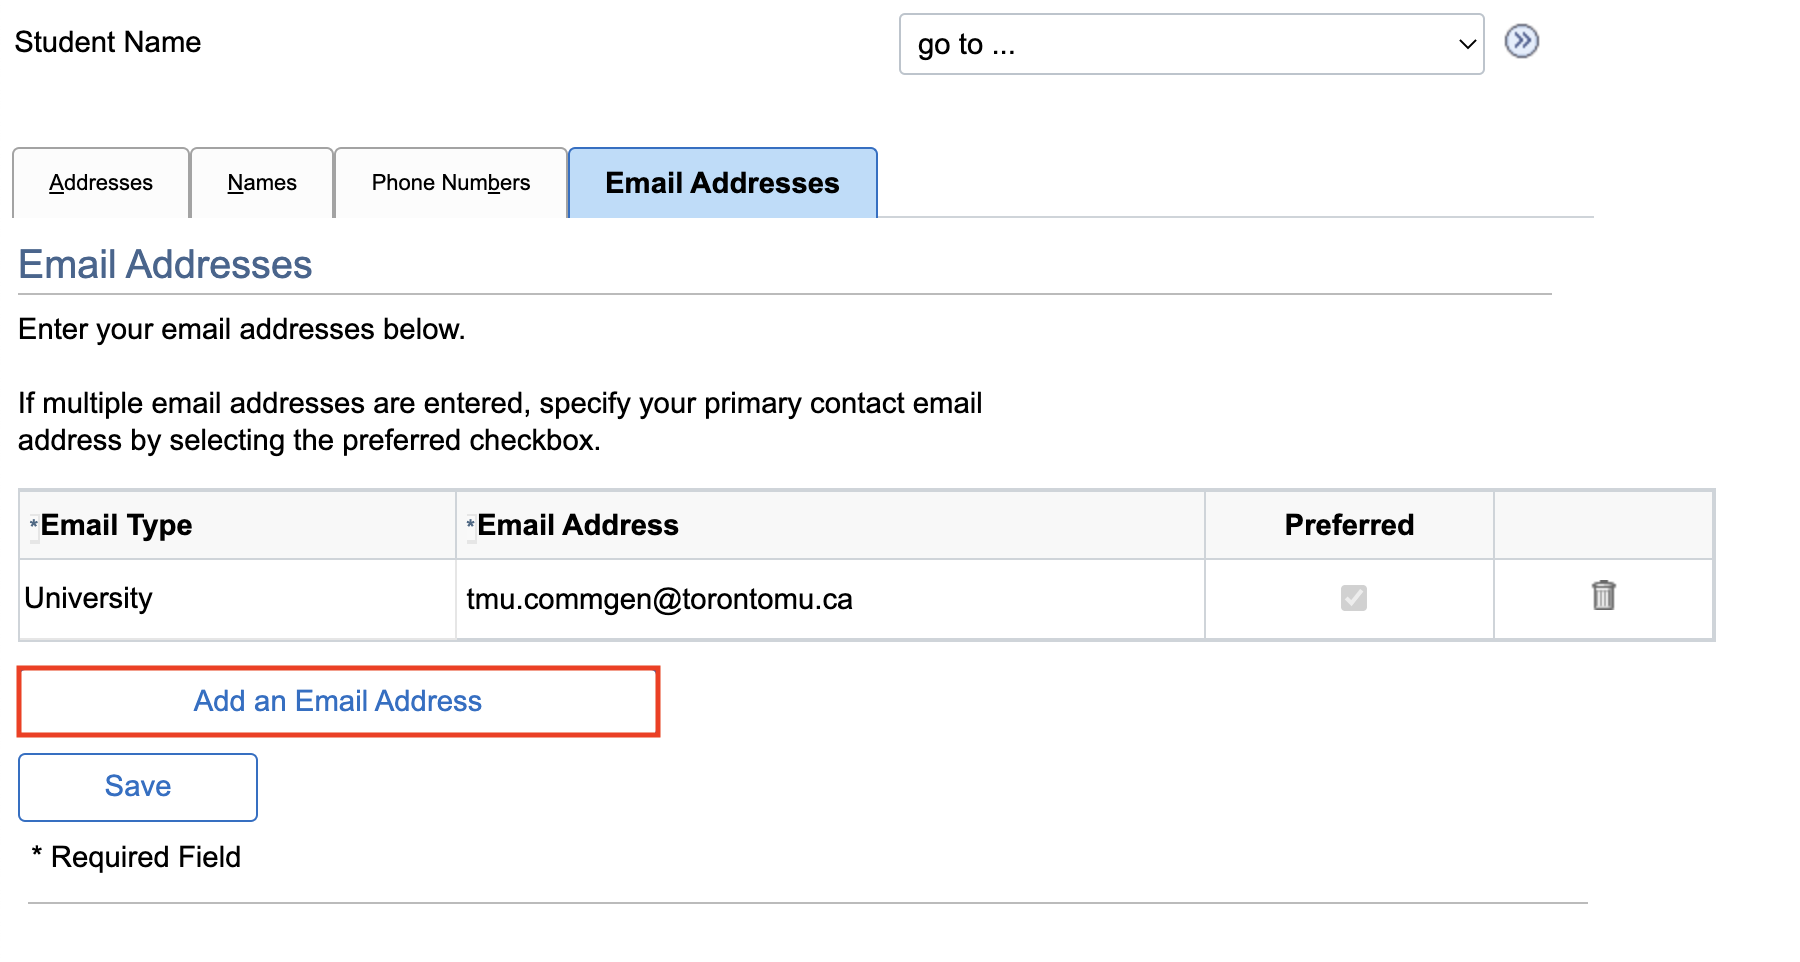 List of user's email addresses with button to Add an Email Address